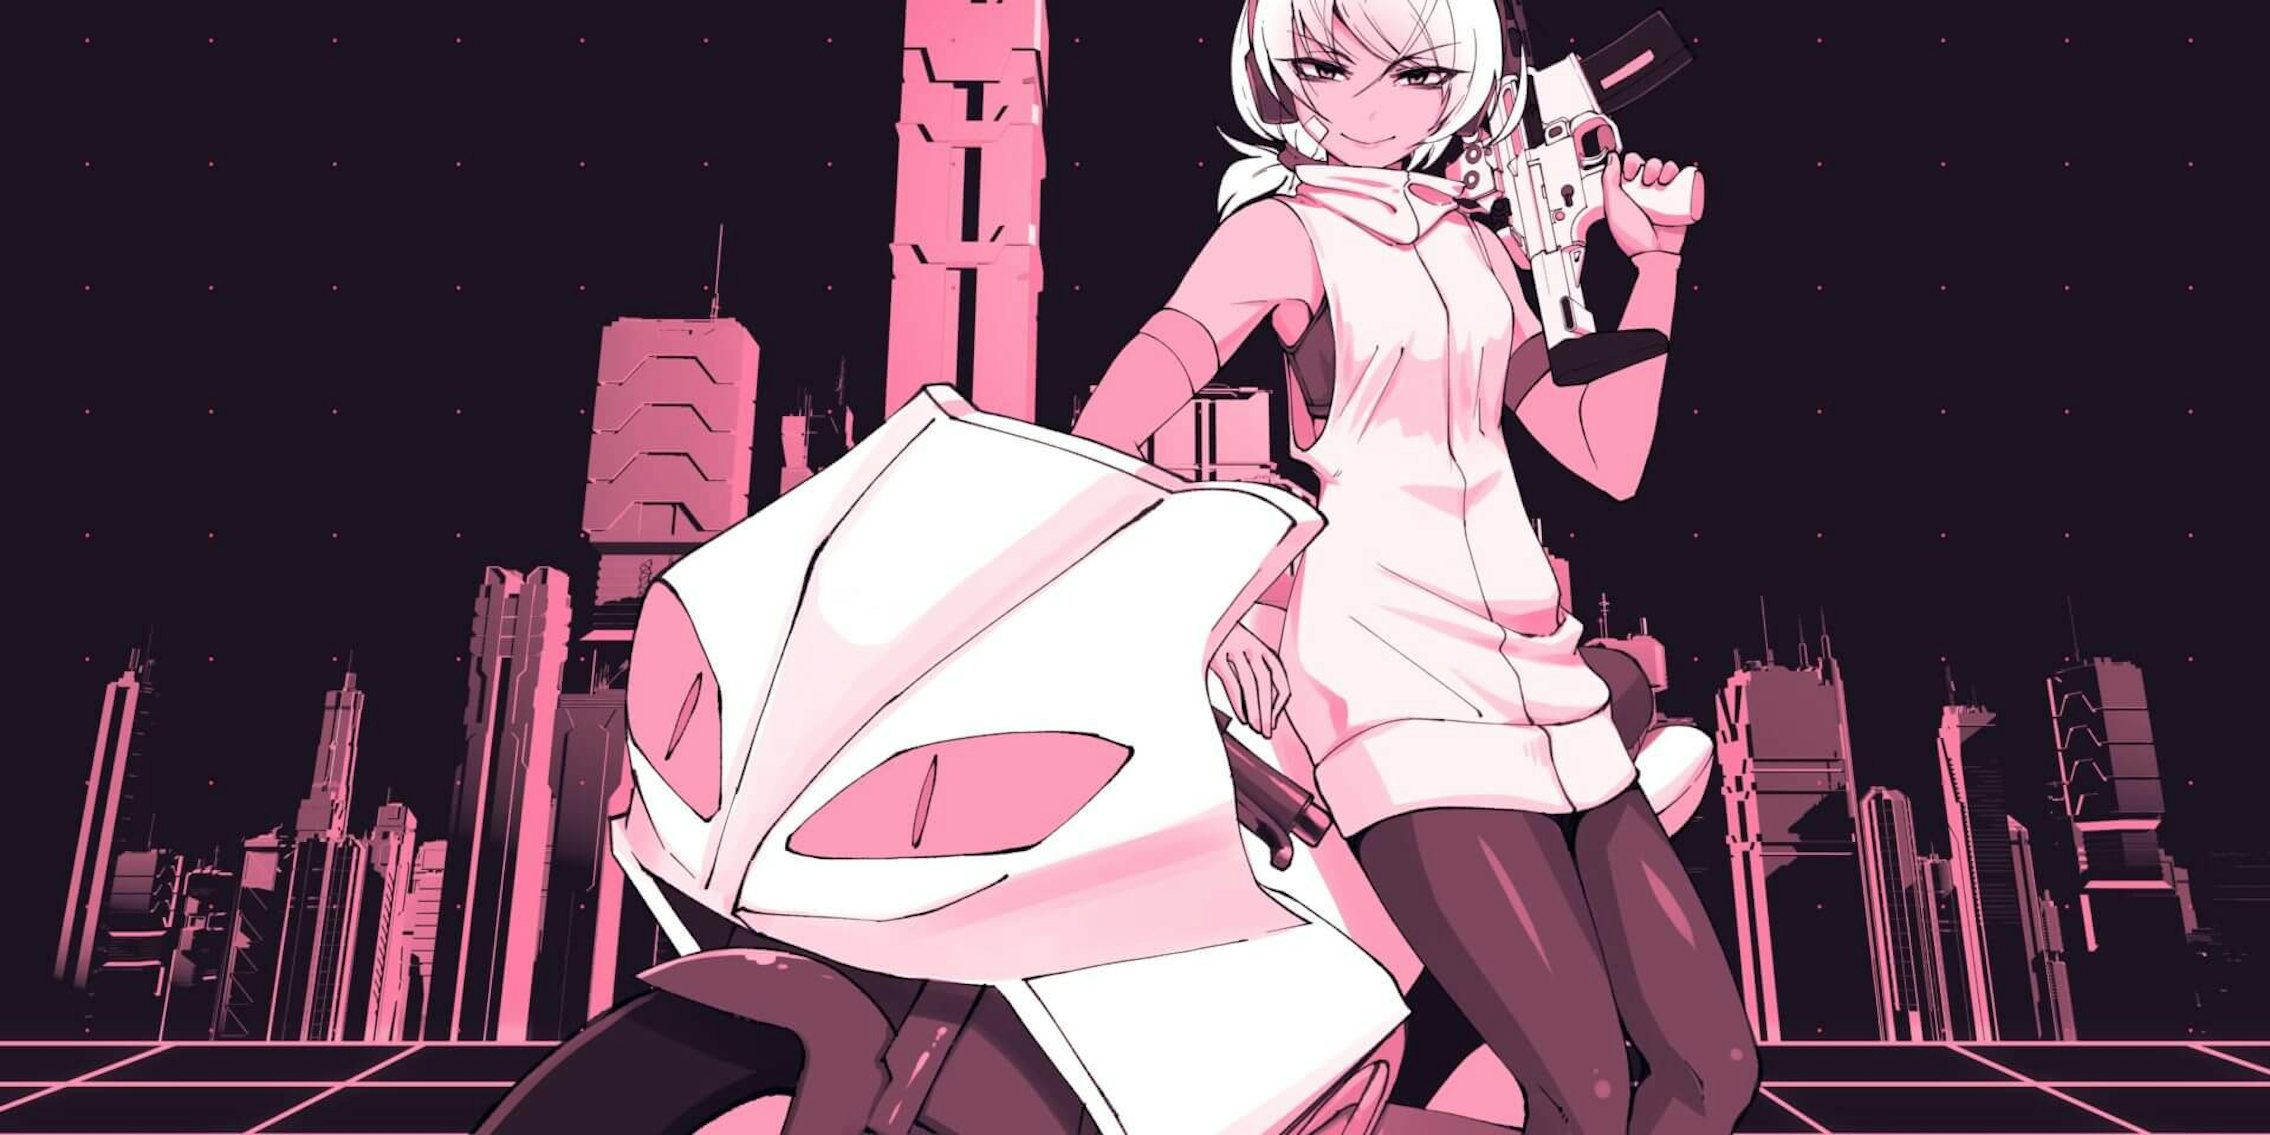 Adult Animated Girls - Uragoner Is a Cyberpunk Role-Playing Game With Lewd Anime Girls